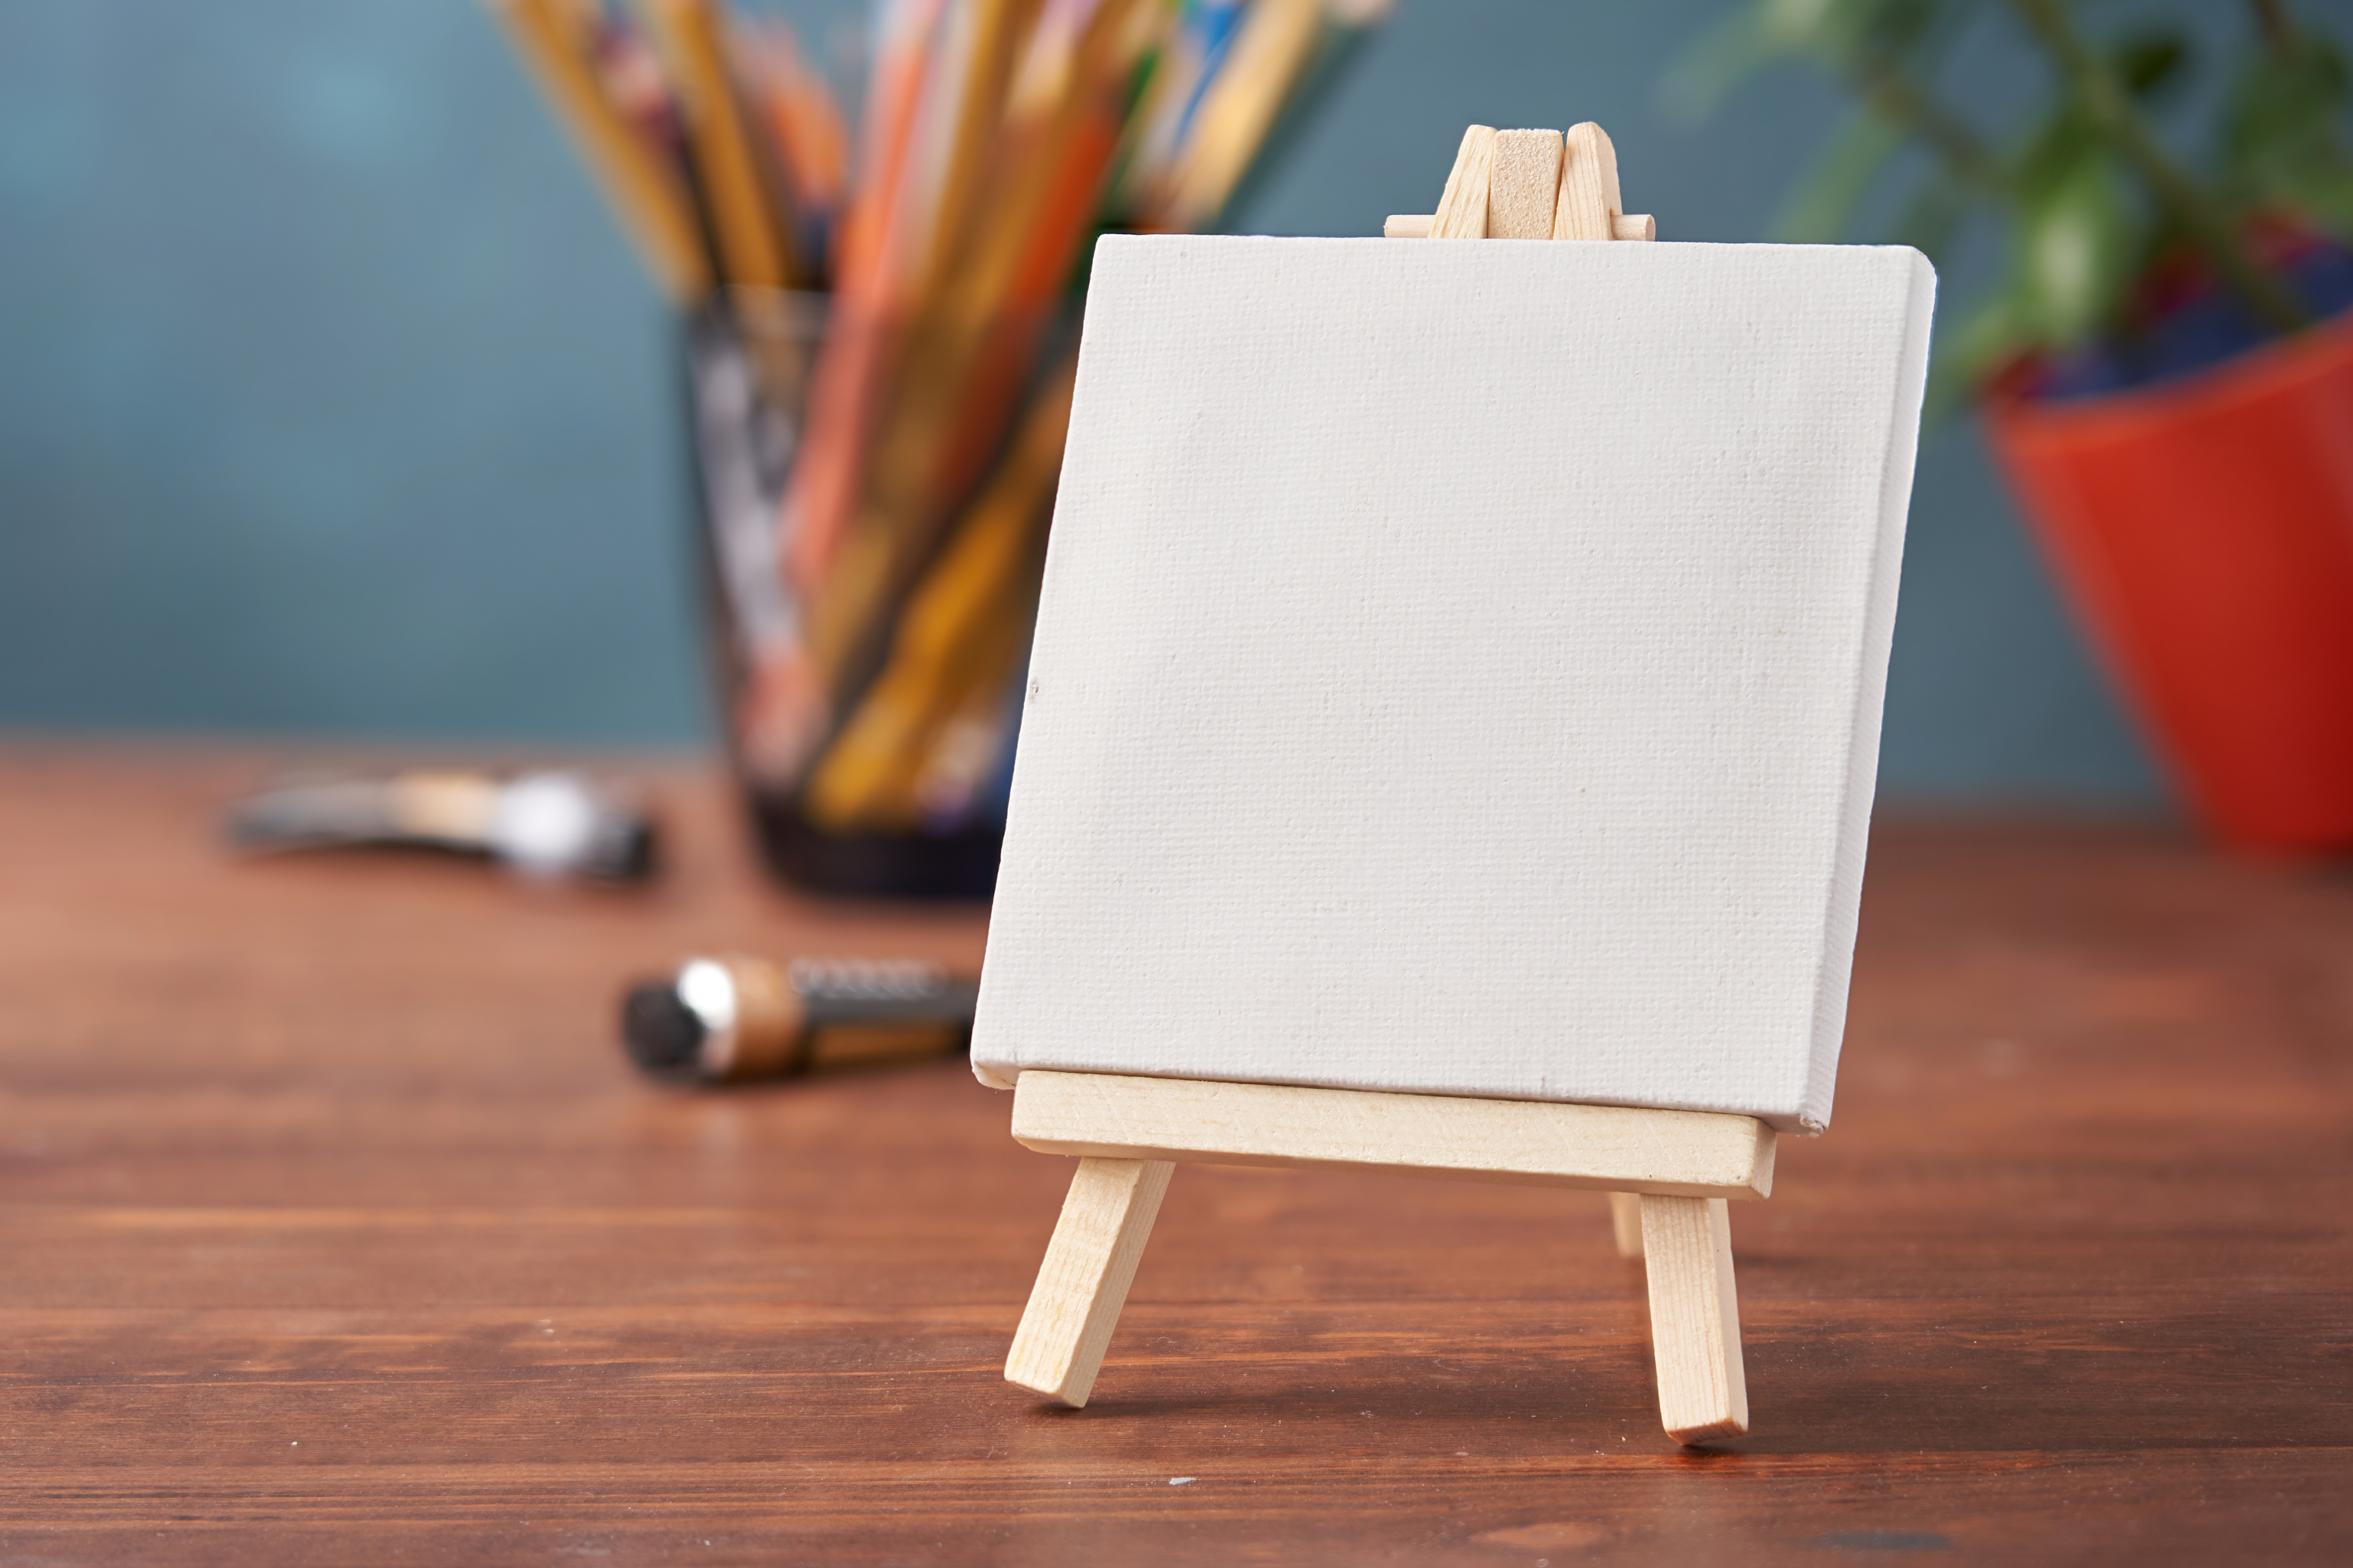 How to Choose a Canvas for Painting - FeltMagnet